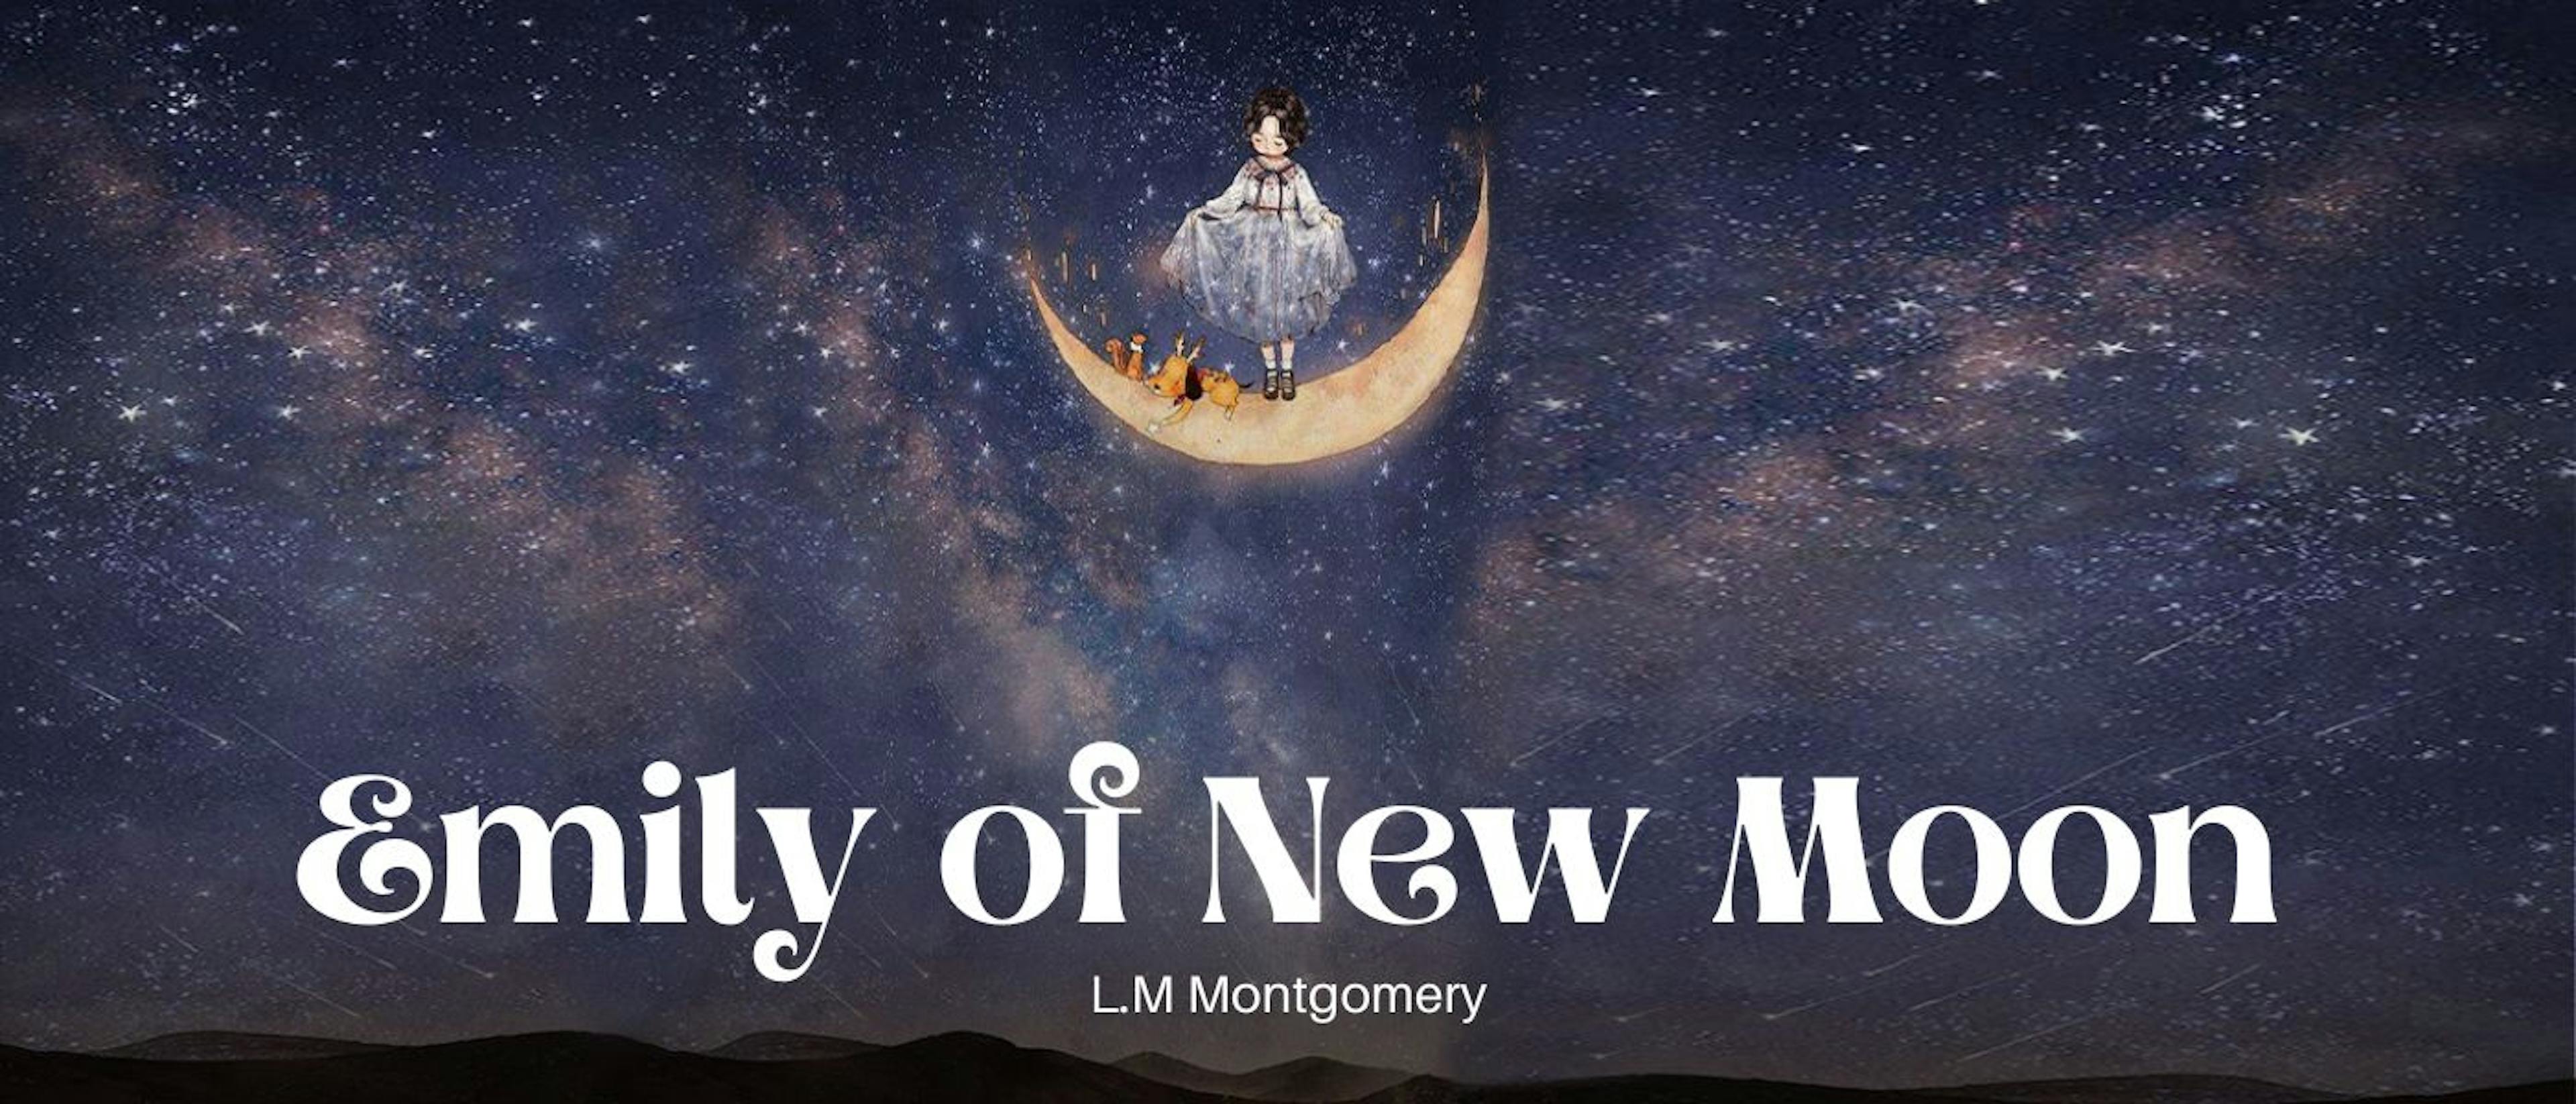 featured image - Emily of New Moon by L. M. Montgomery - Table of Links